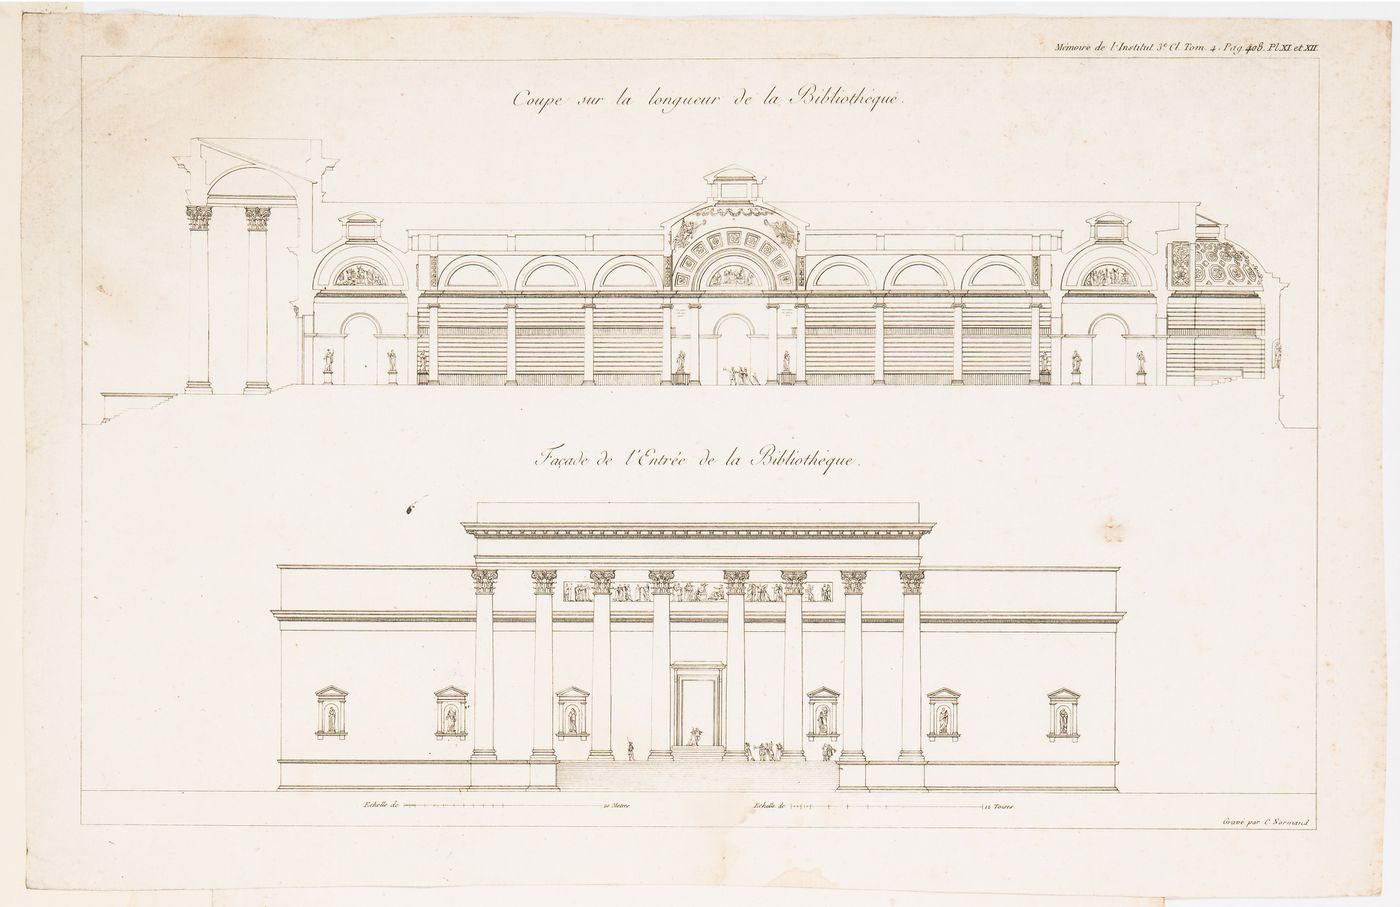 Library on the site of the Magdelaine: Longitudinal section and principal elevation